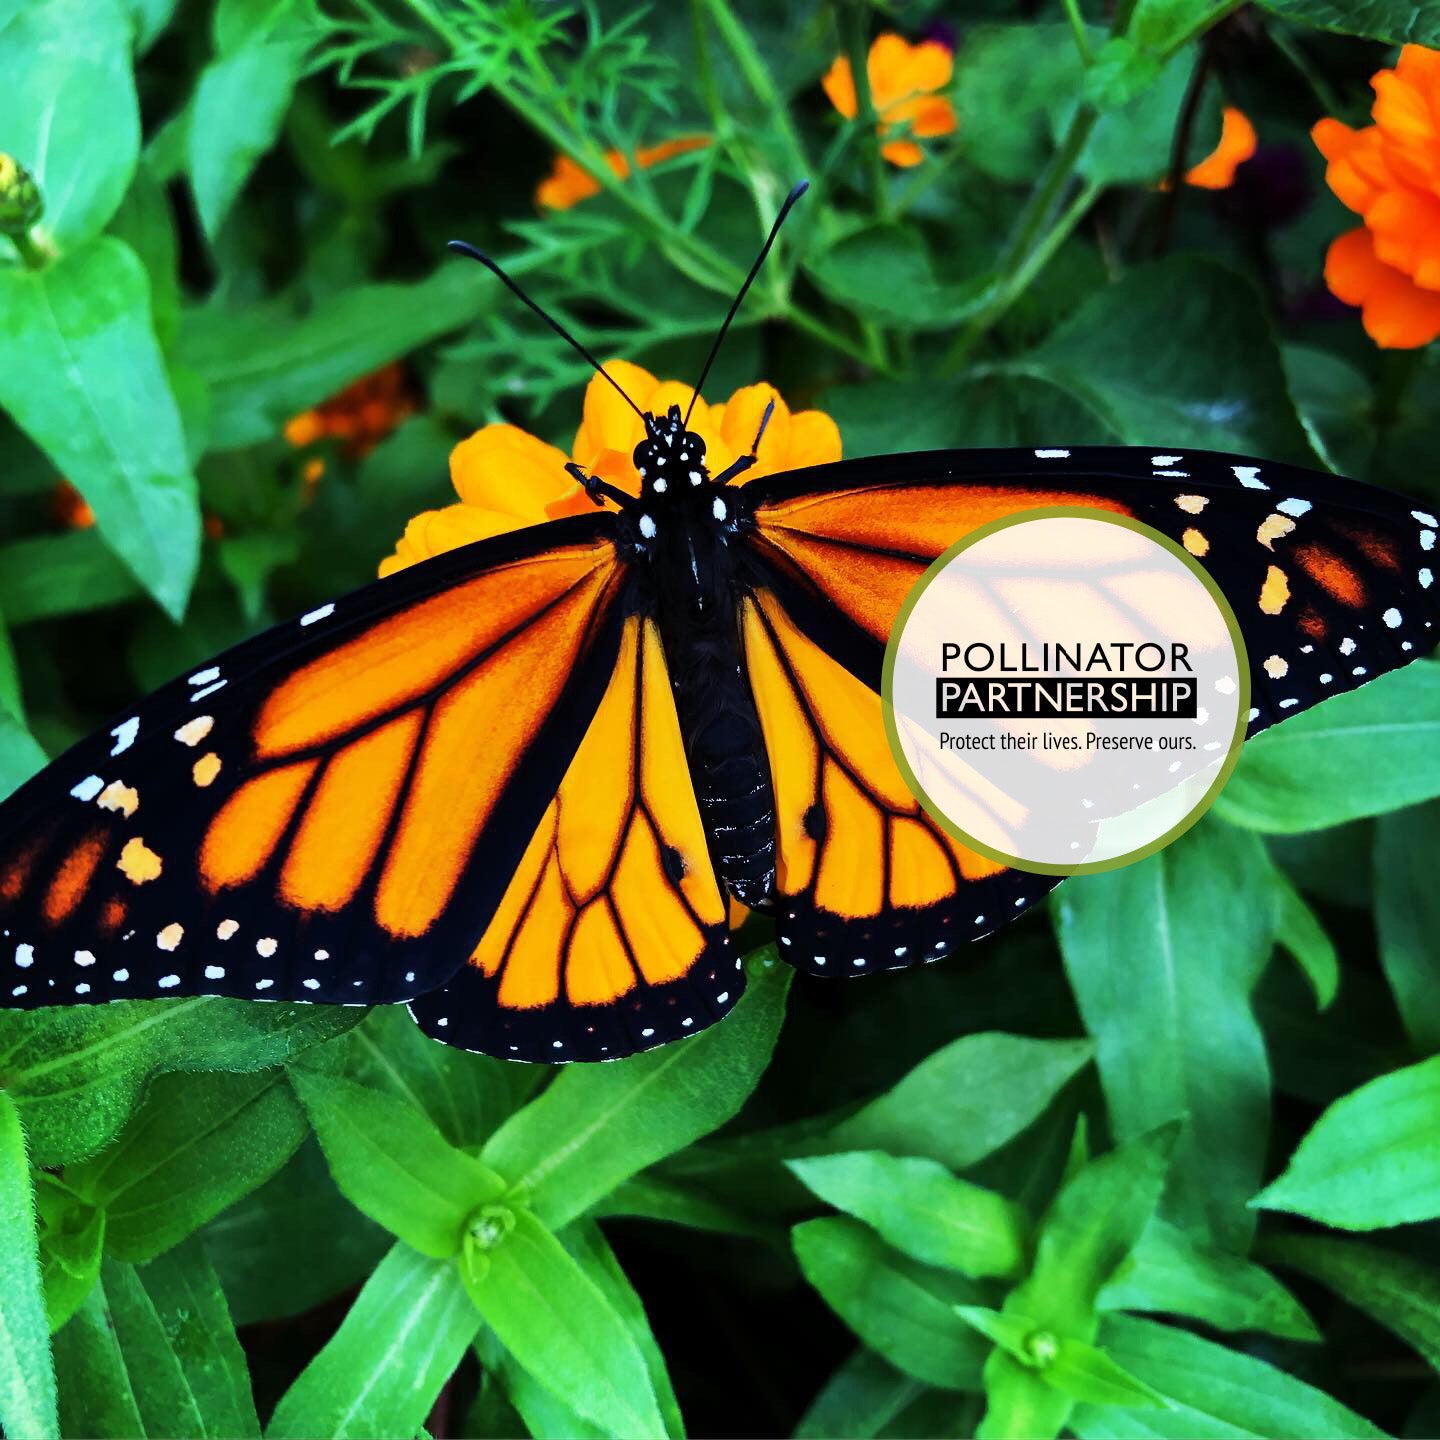 Pollinator Partnership logo - Supporting pollinator health and ecosystems through conservation, education, and research.